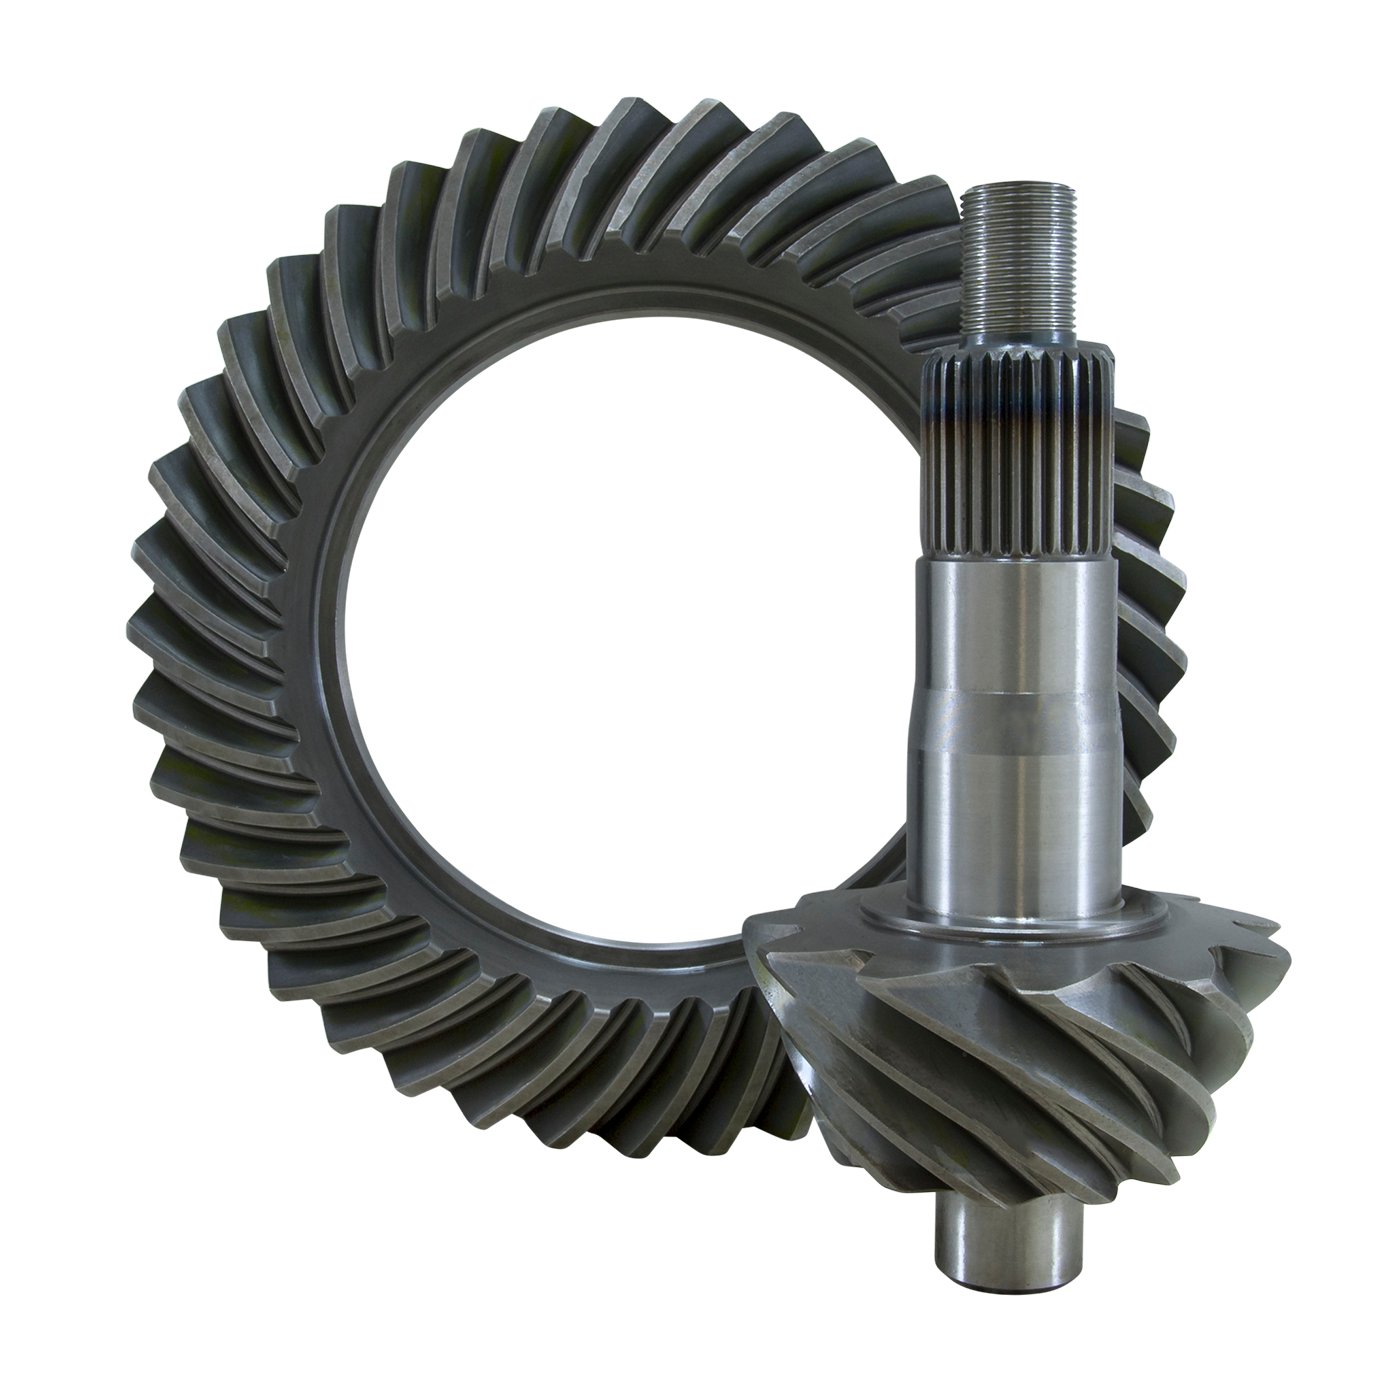 USA Standard 36184 Ring & Pinion Gear Set, For 10.5 in. GM 14 Bolt Truck, 4.56 Ratio